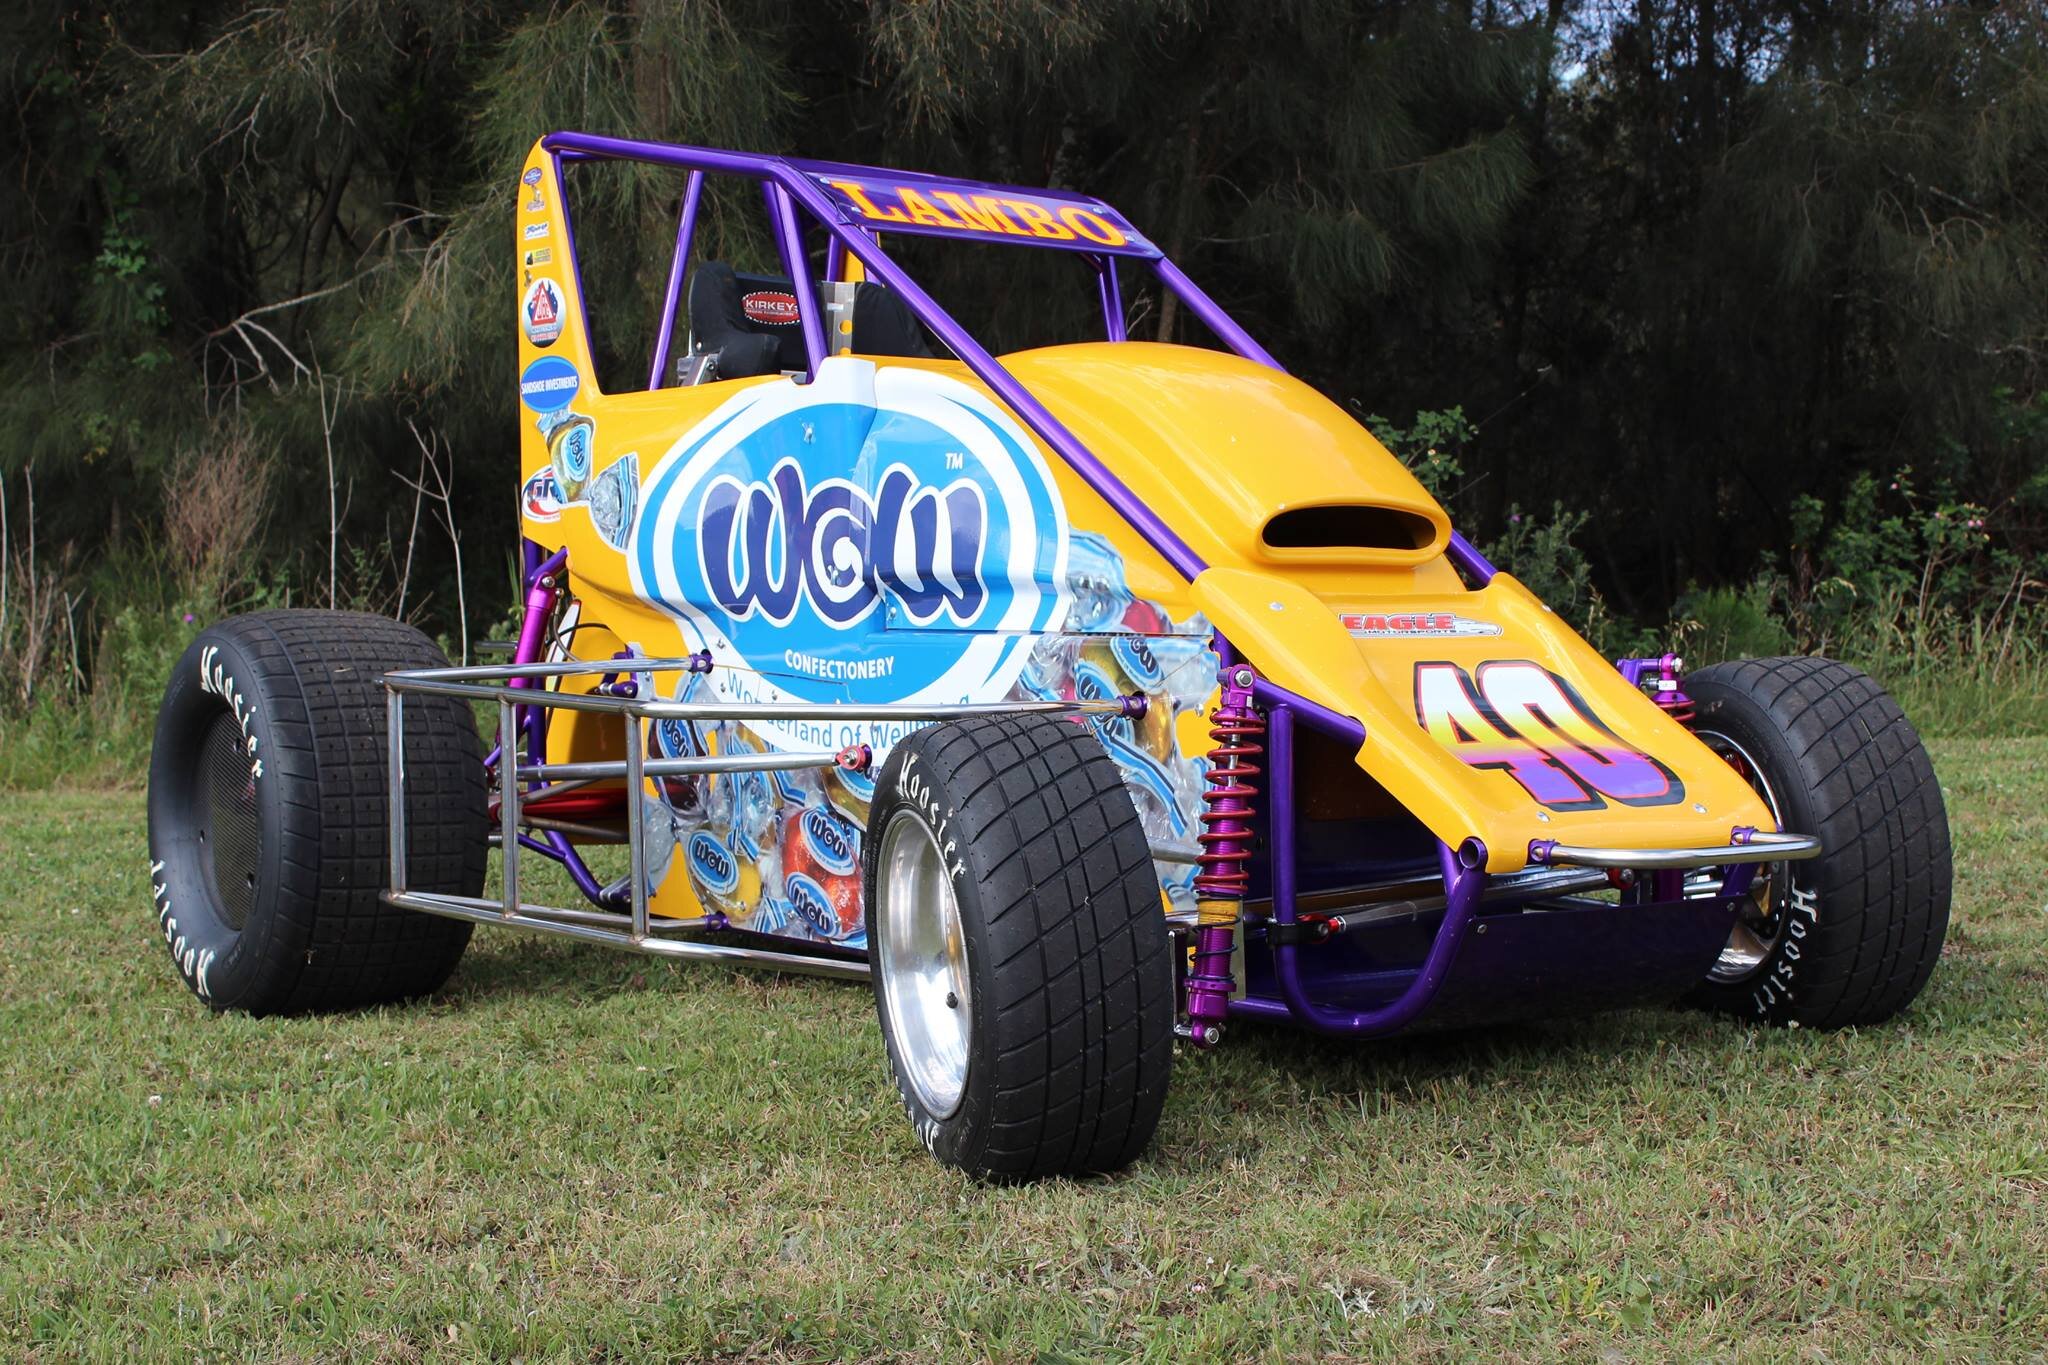 Welcome to Dave Lambert Racing.
From Wollongong Australia, Dave Lambert is the pilot of the WOW Confectionery, Toyota powered Eagle #40 Speedcar.